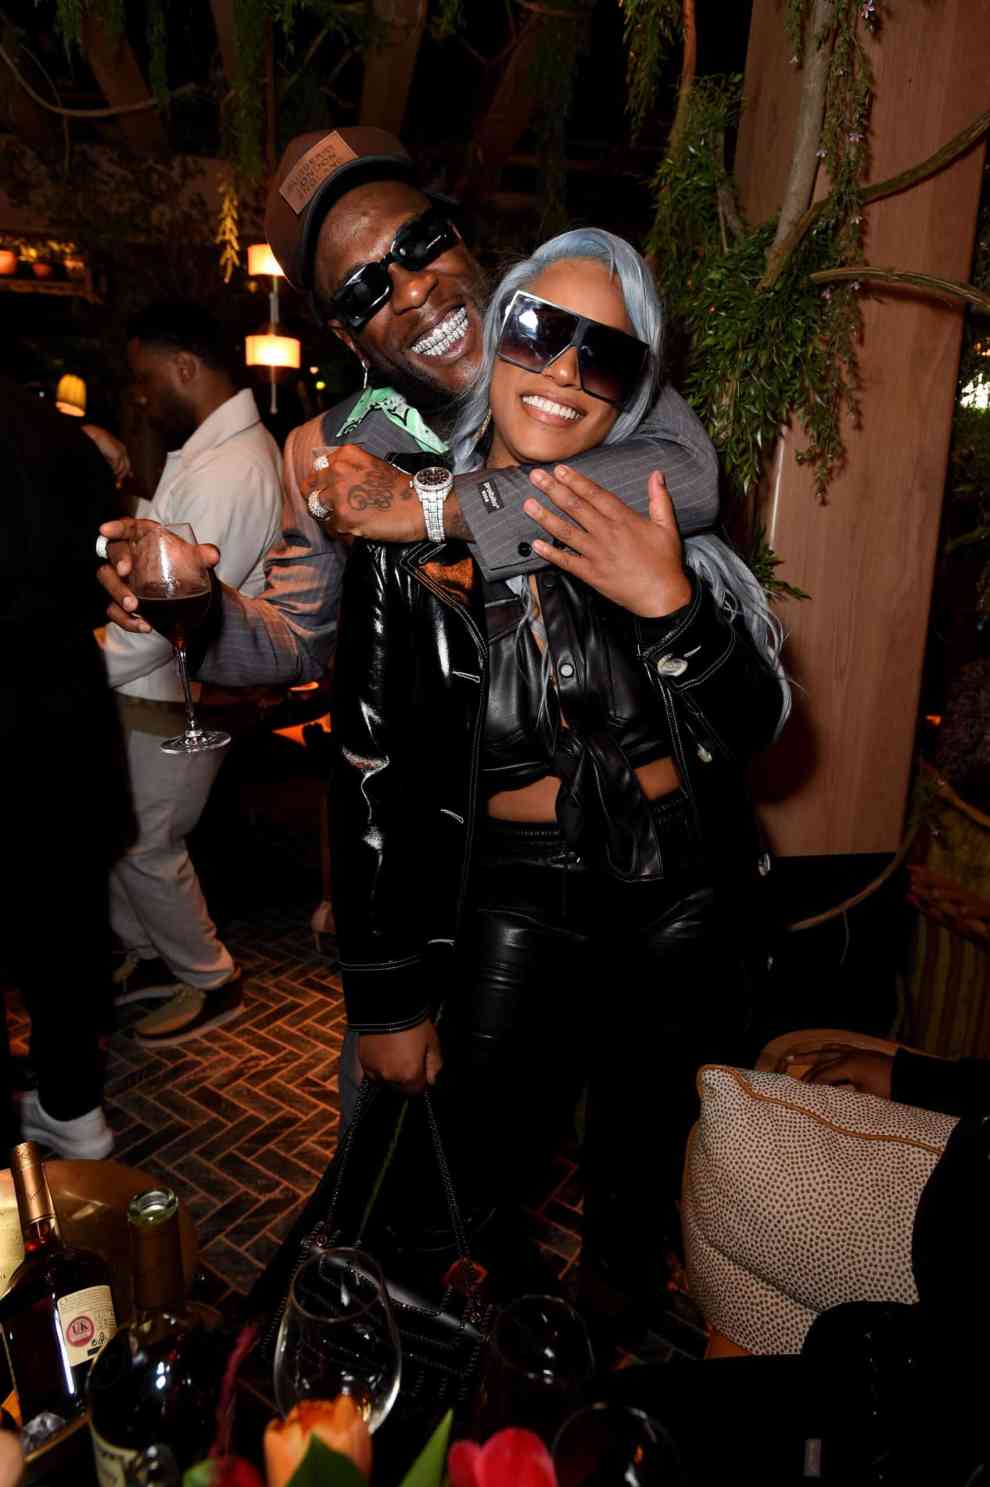 Burna Boy and Stefflon Don attend the 'YouTube Music Excellence Brunch' hosted by YouTube Music’s Global Head of Music, Lyor Cohen and Youtube Music’s Head of Urban Music, Tuma Basa to celebrate the Black British Culture in Music at 14 Hills Restaurant and Bar on February 16, 2020 in London, England.